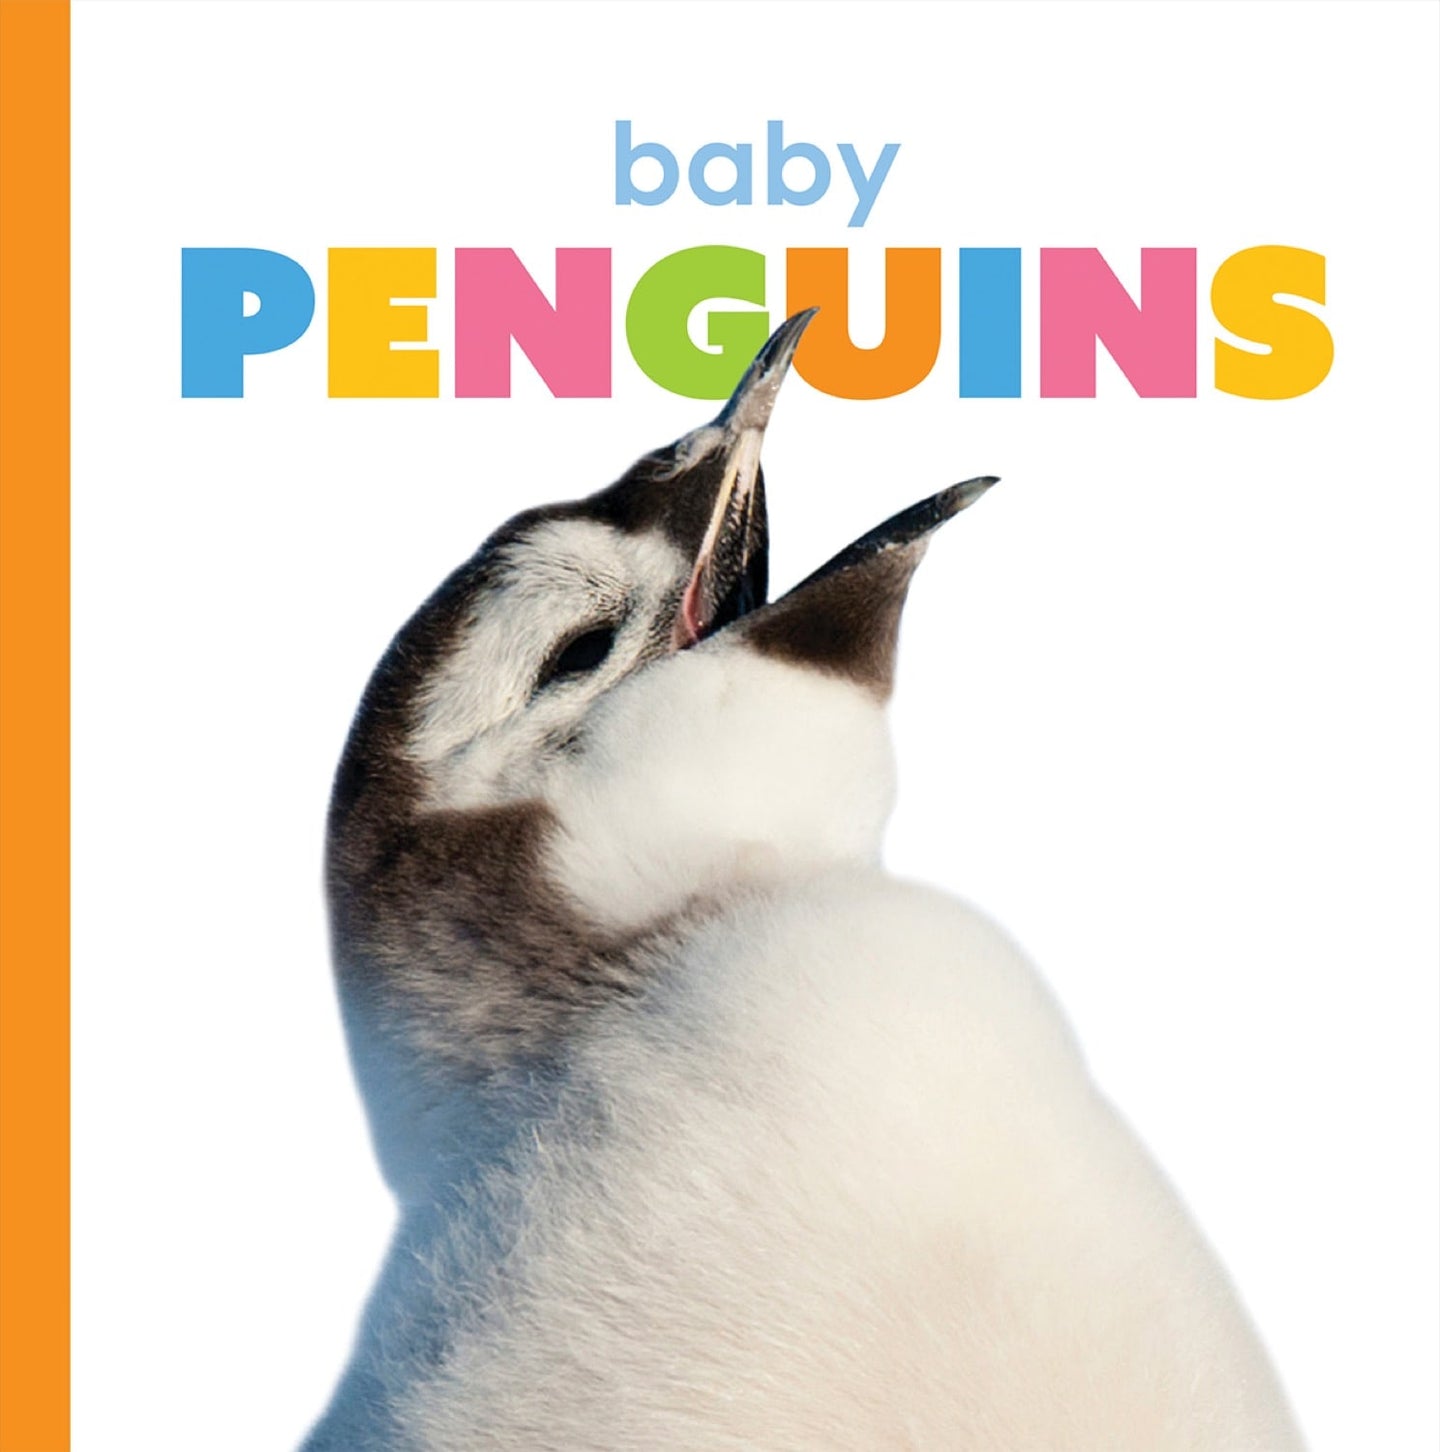 Der Anfang: Baby-Pinguine